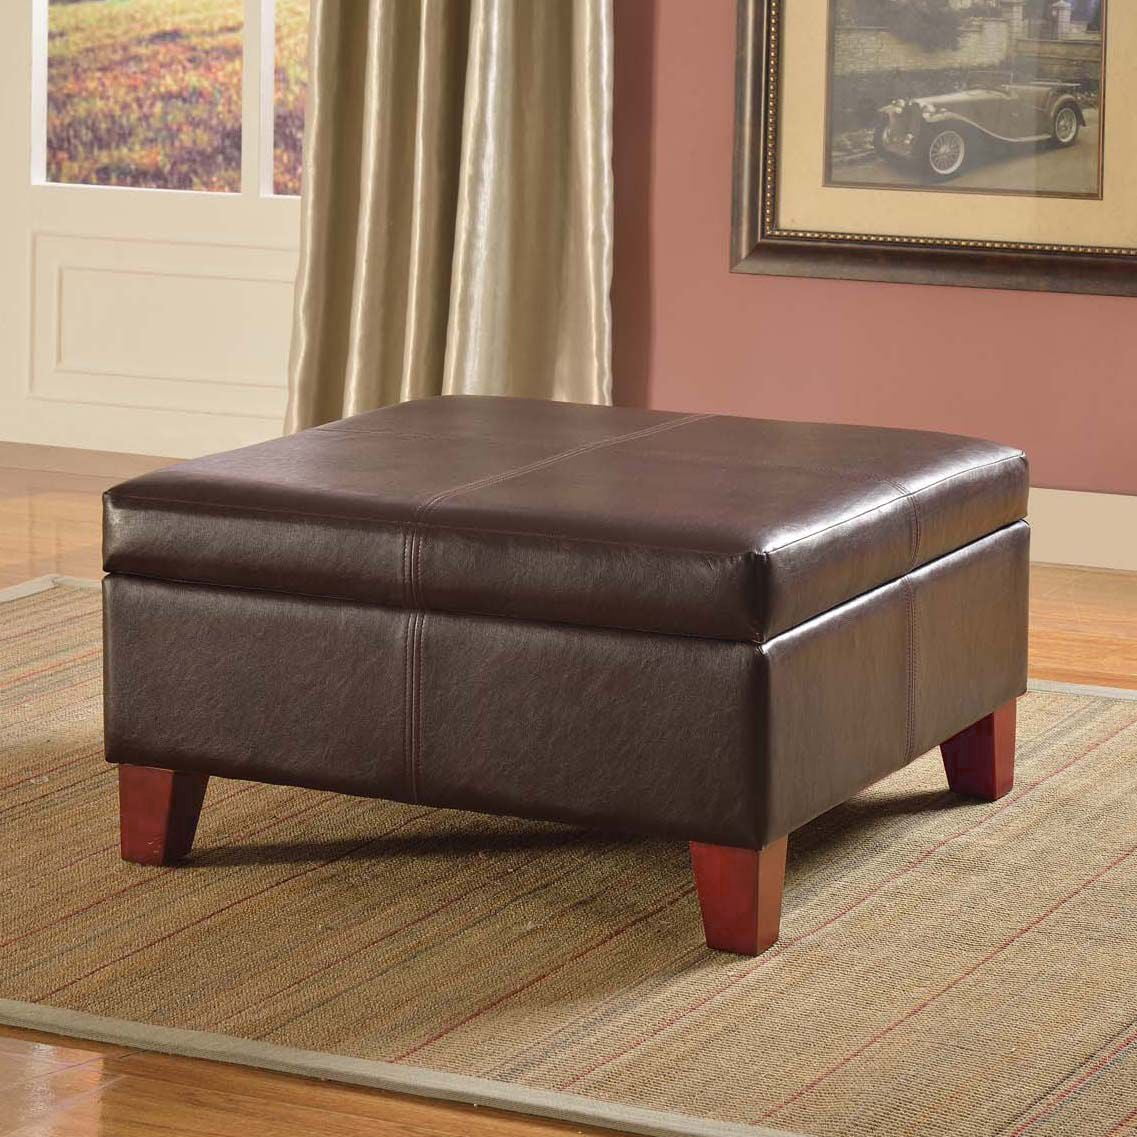 Homepop Luxury Large Faux Leather, Faux Leather Ottoman Brown